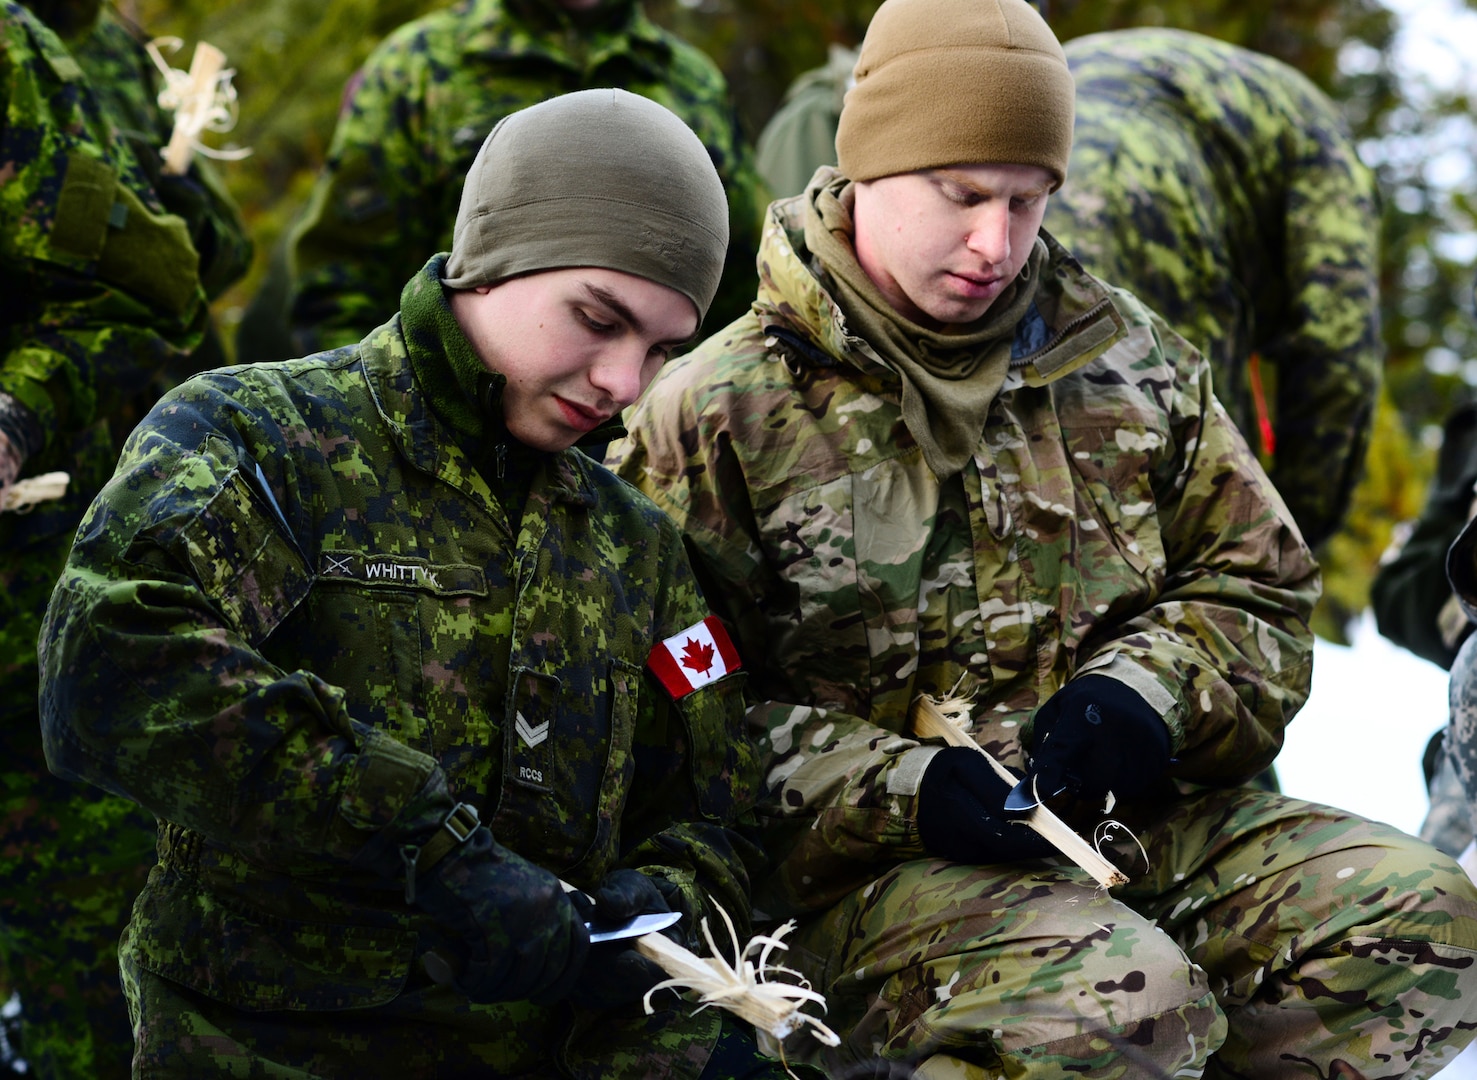 ore-guard-soldiers-learn-arctic-survival-from-canadians-national-guard-guard-news-the